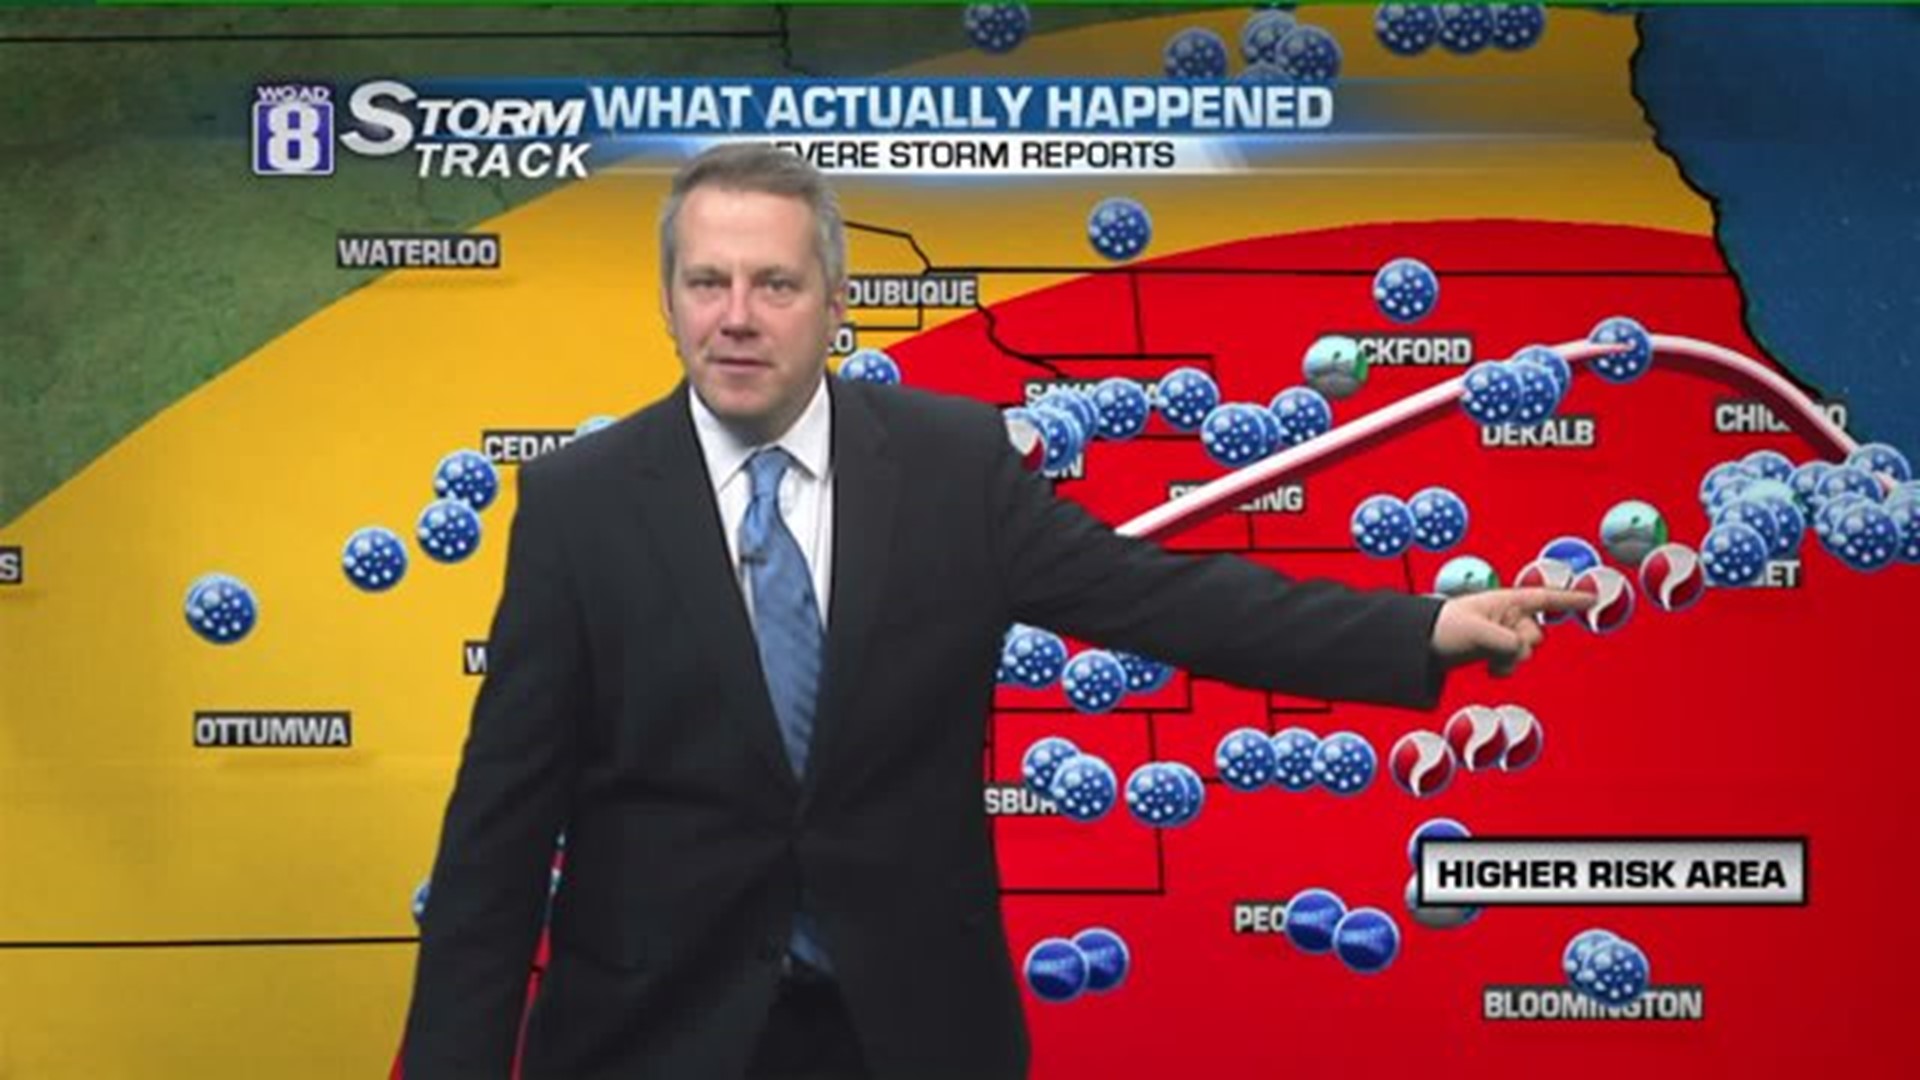 Eric speaks specifically to the people who said the forecast was blown out of proportion